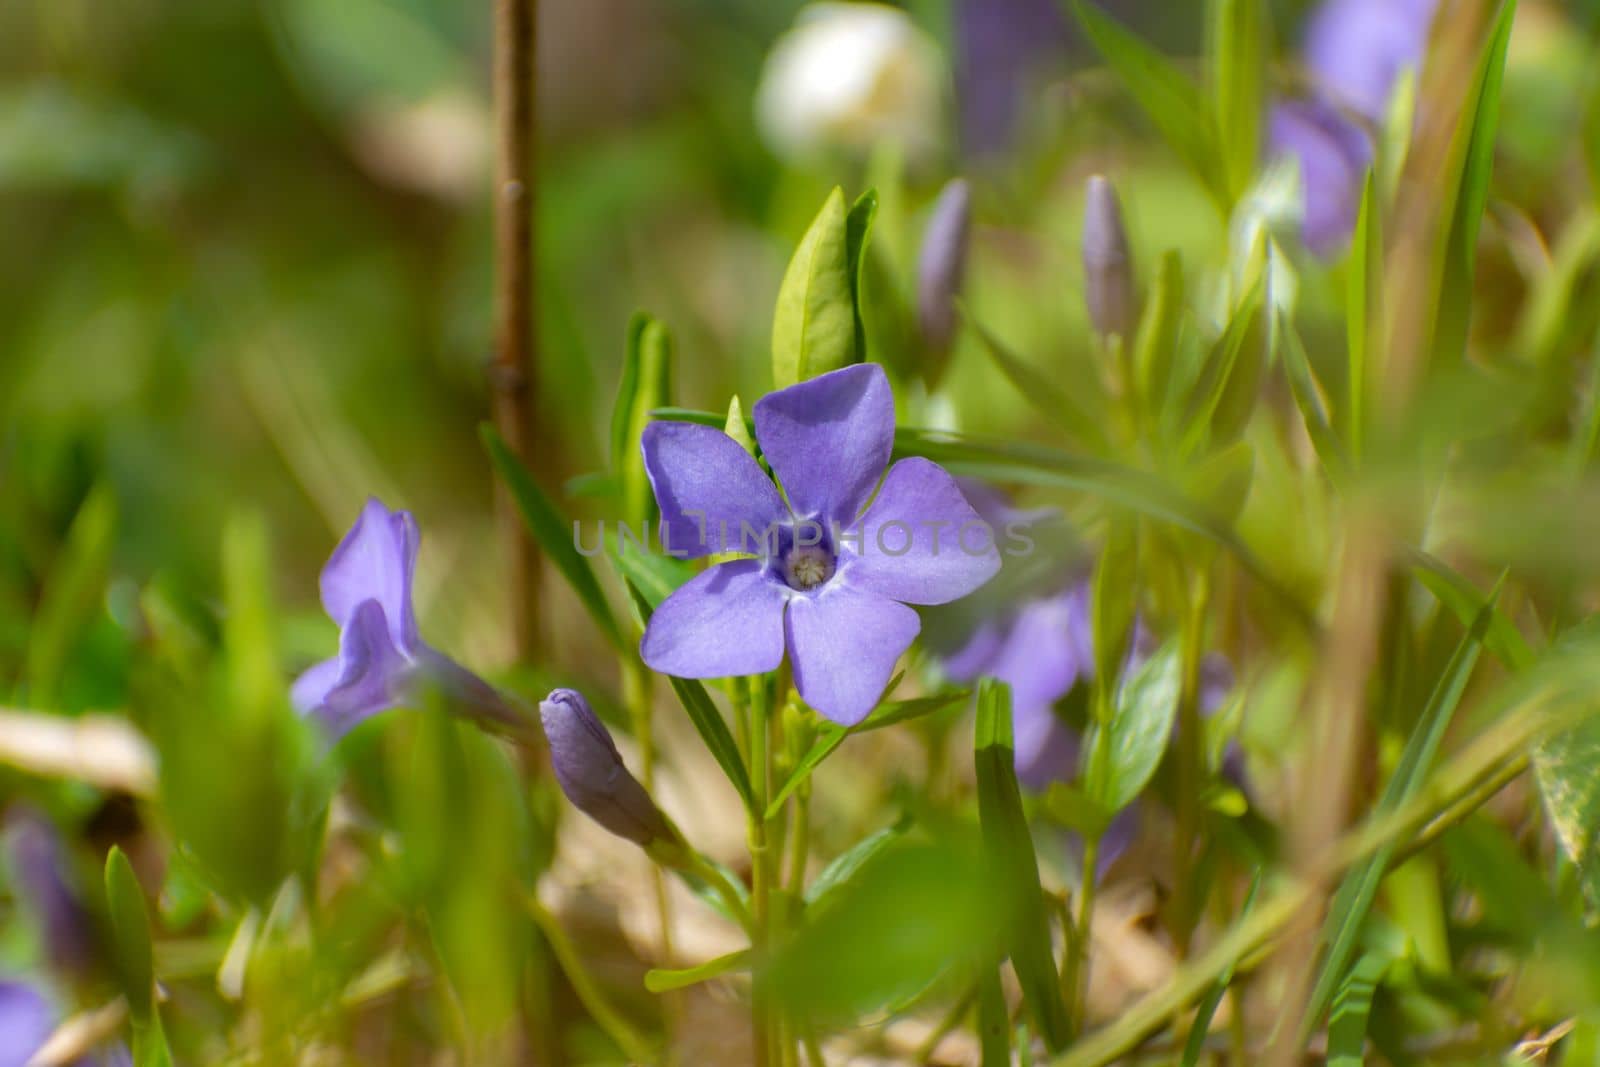 Periwinkle flower and buds in lush grass, spring view